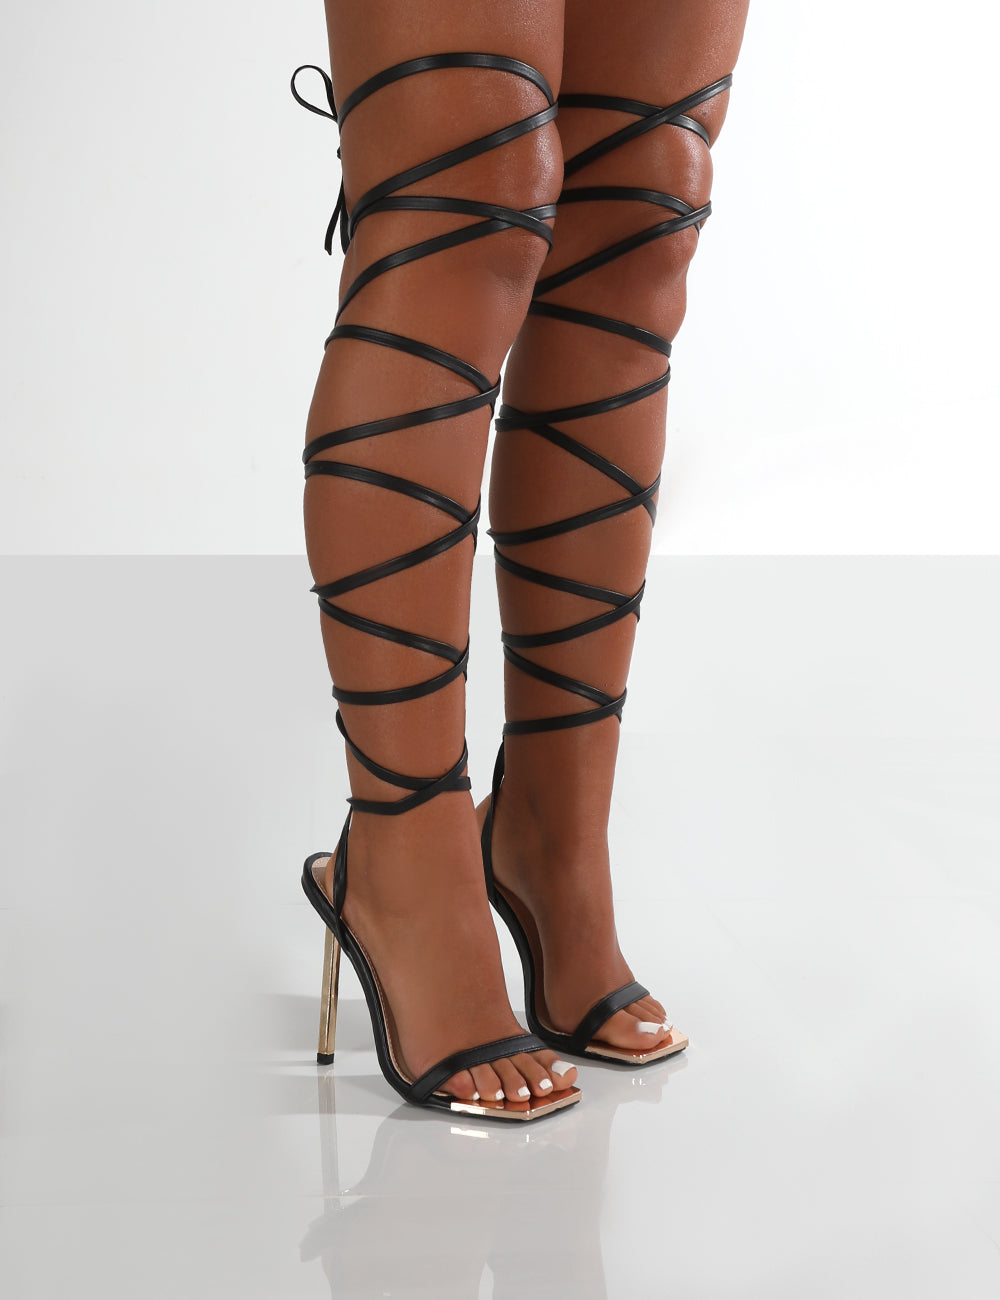 Strappy Lace Up Mid Calf Knee High Gladiator Stiletto Heel Pumps Sandals  G31 | eBay